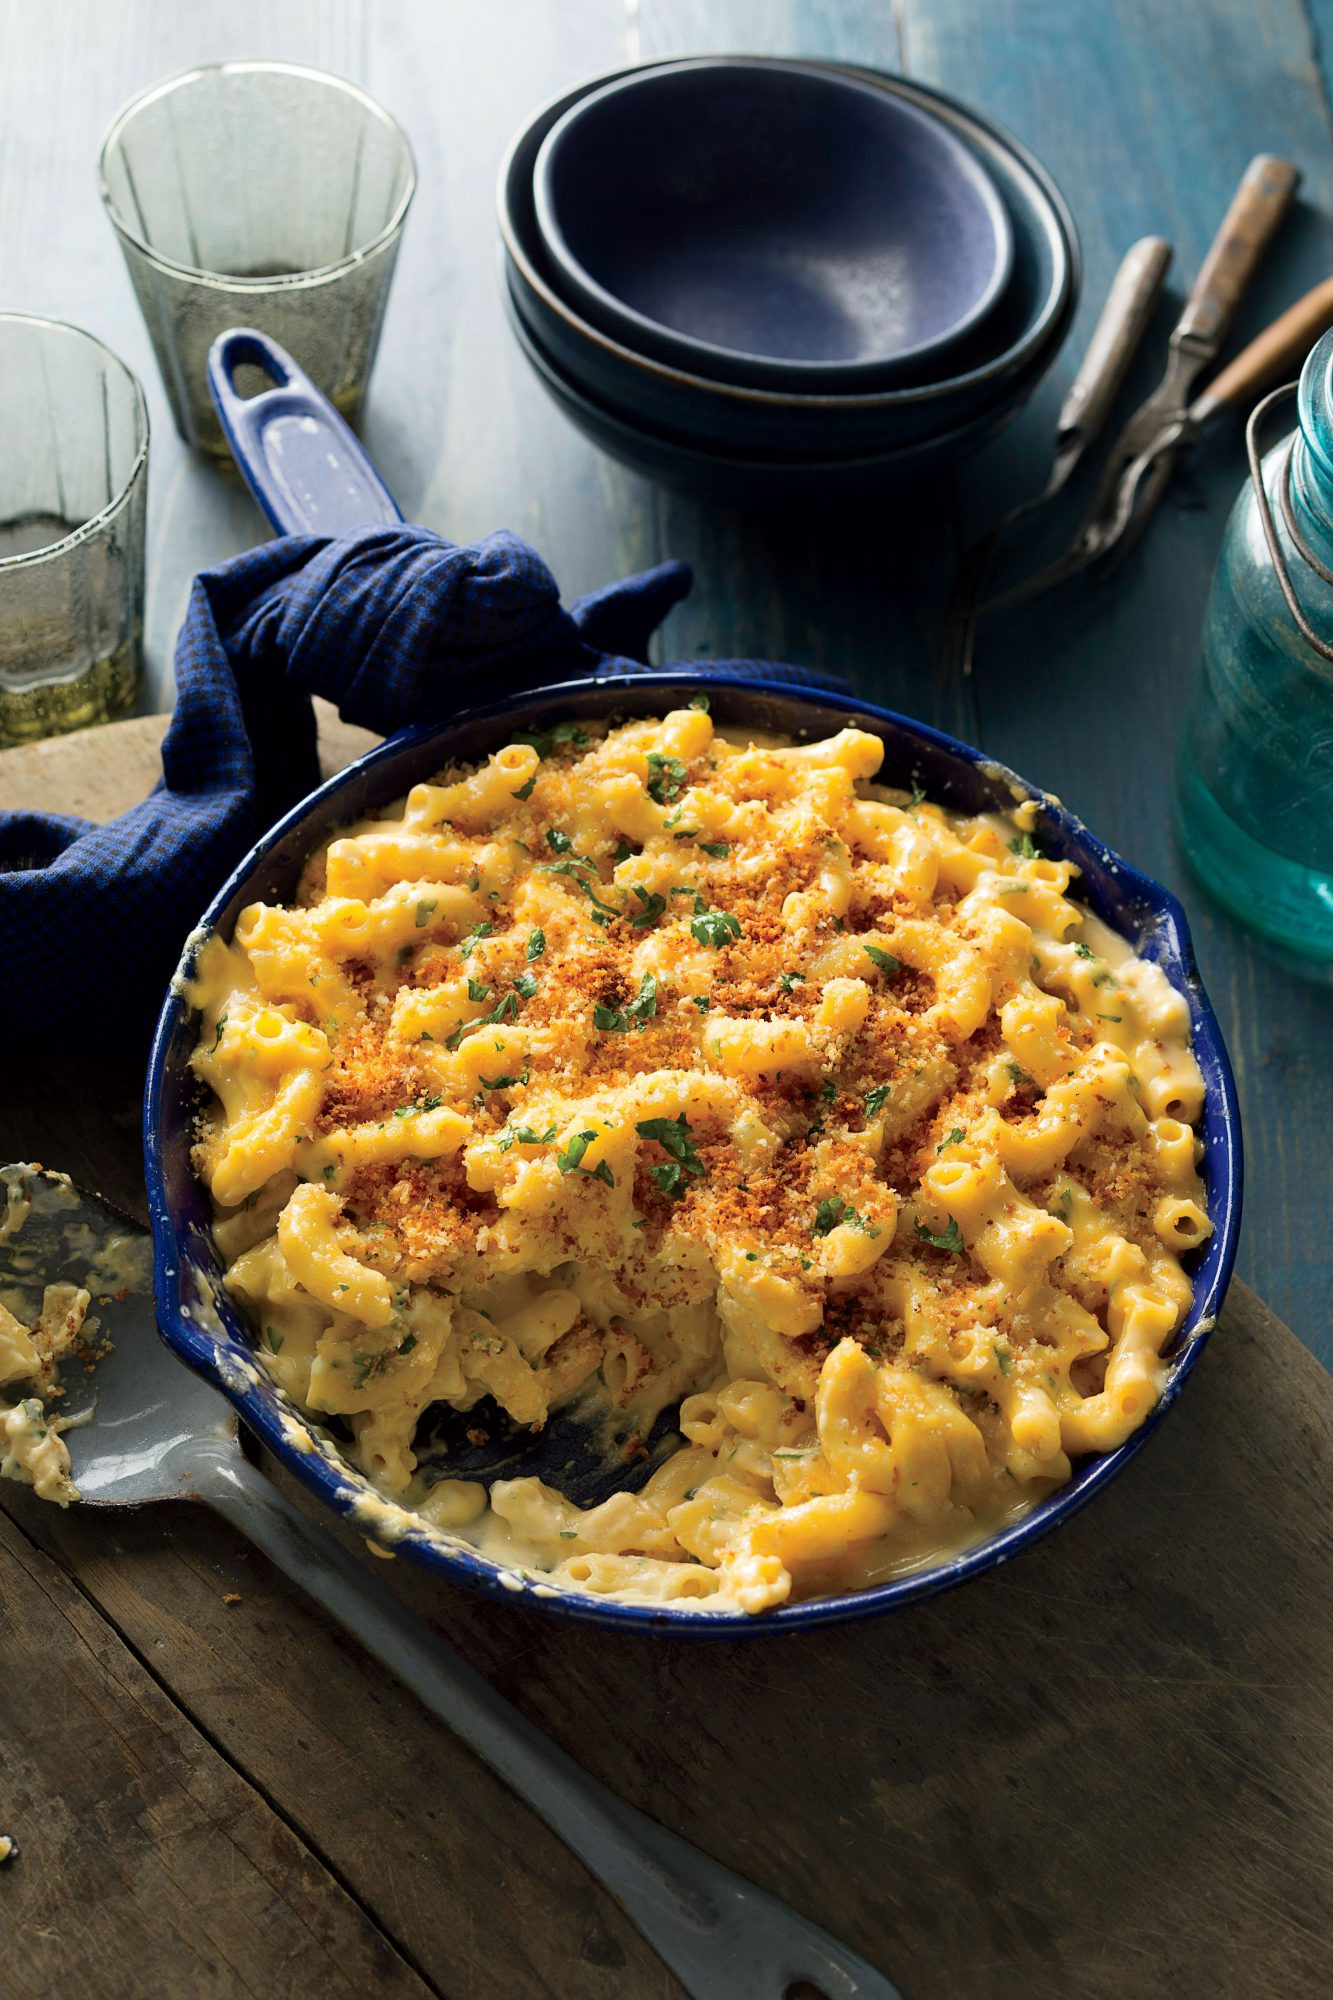 Southern Baked Macaroni And Cheese With Bread Crumbs
 Skillet Mac and Cheese with Crispy Breadcrumbs Recipe